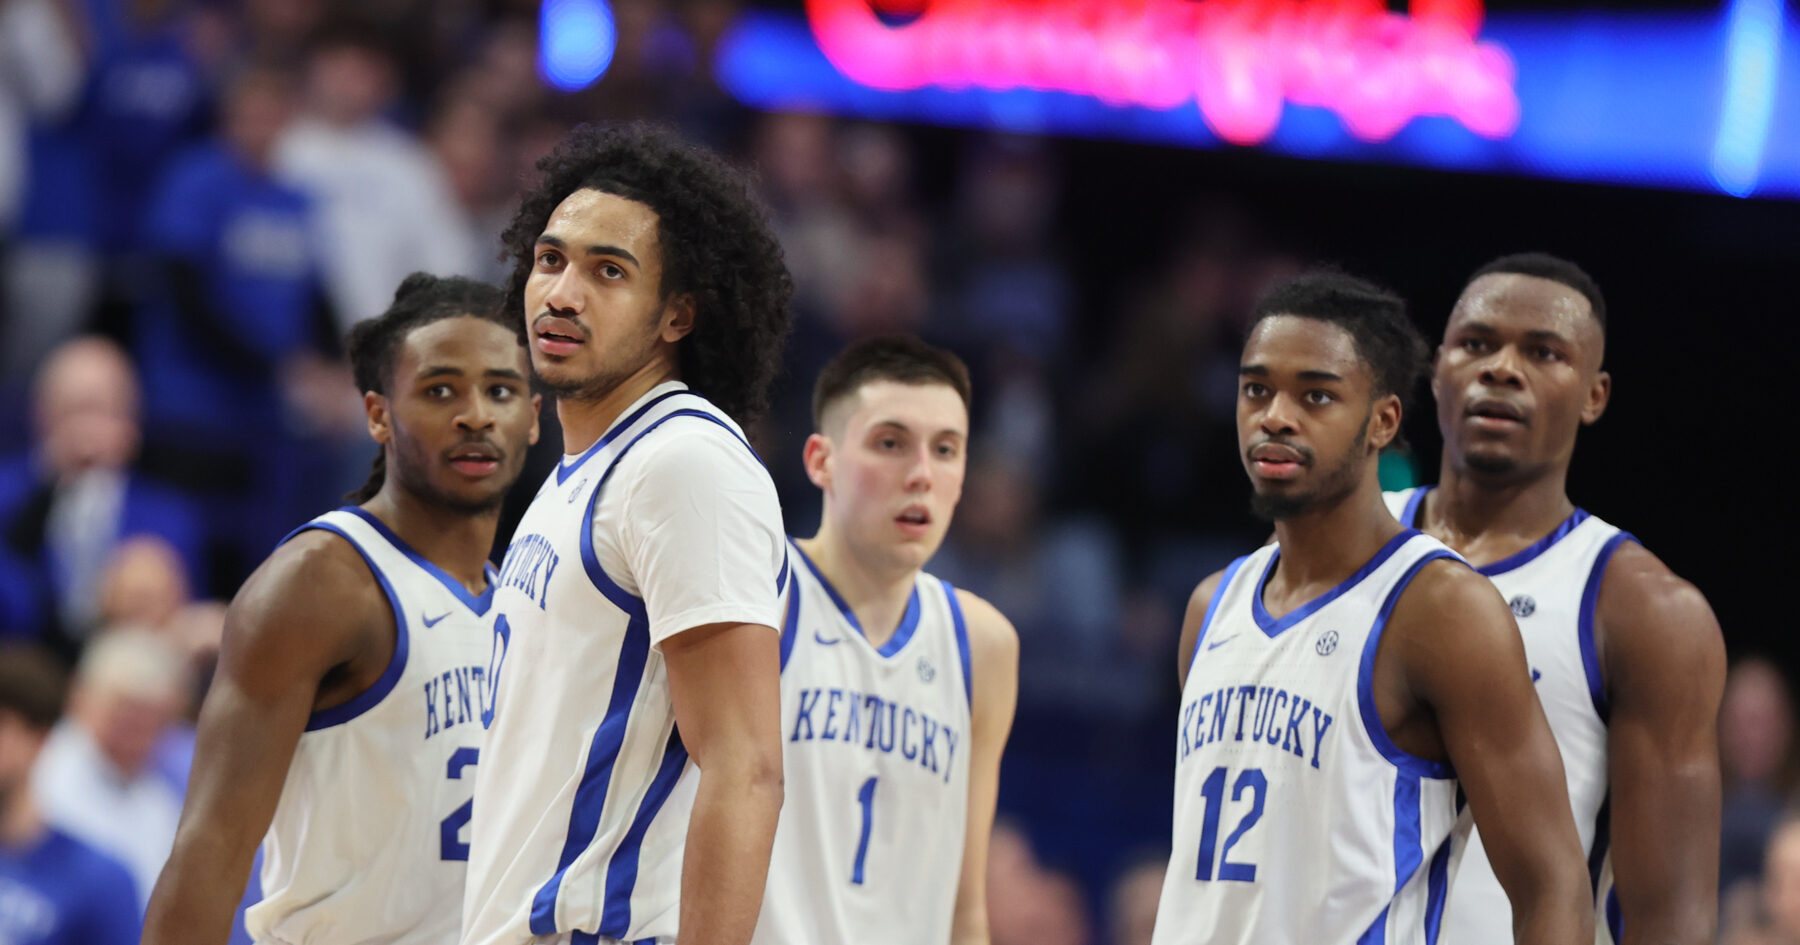 Crunching the Numbers: Recruiting rankings and the NBA Draft